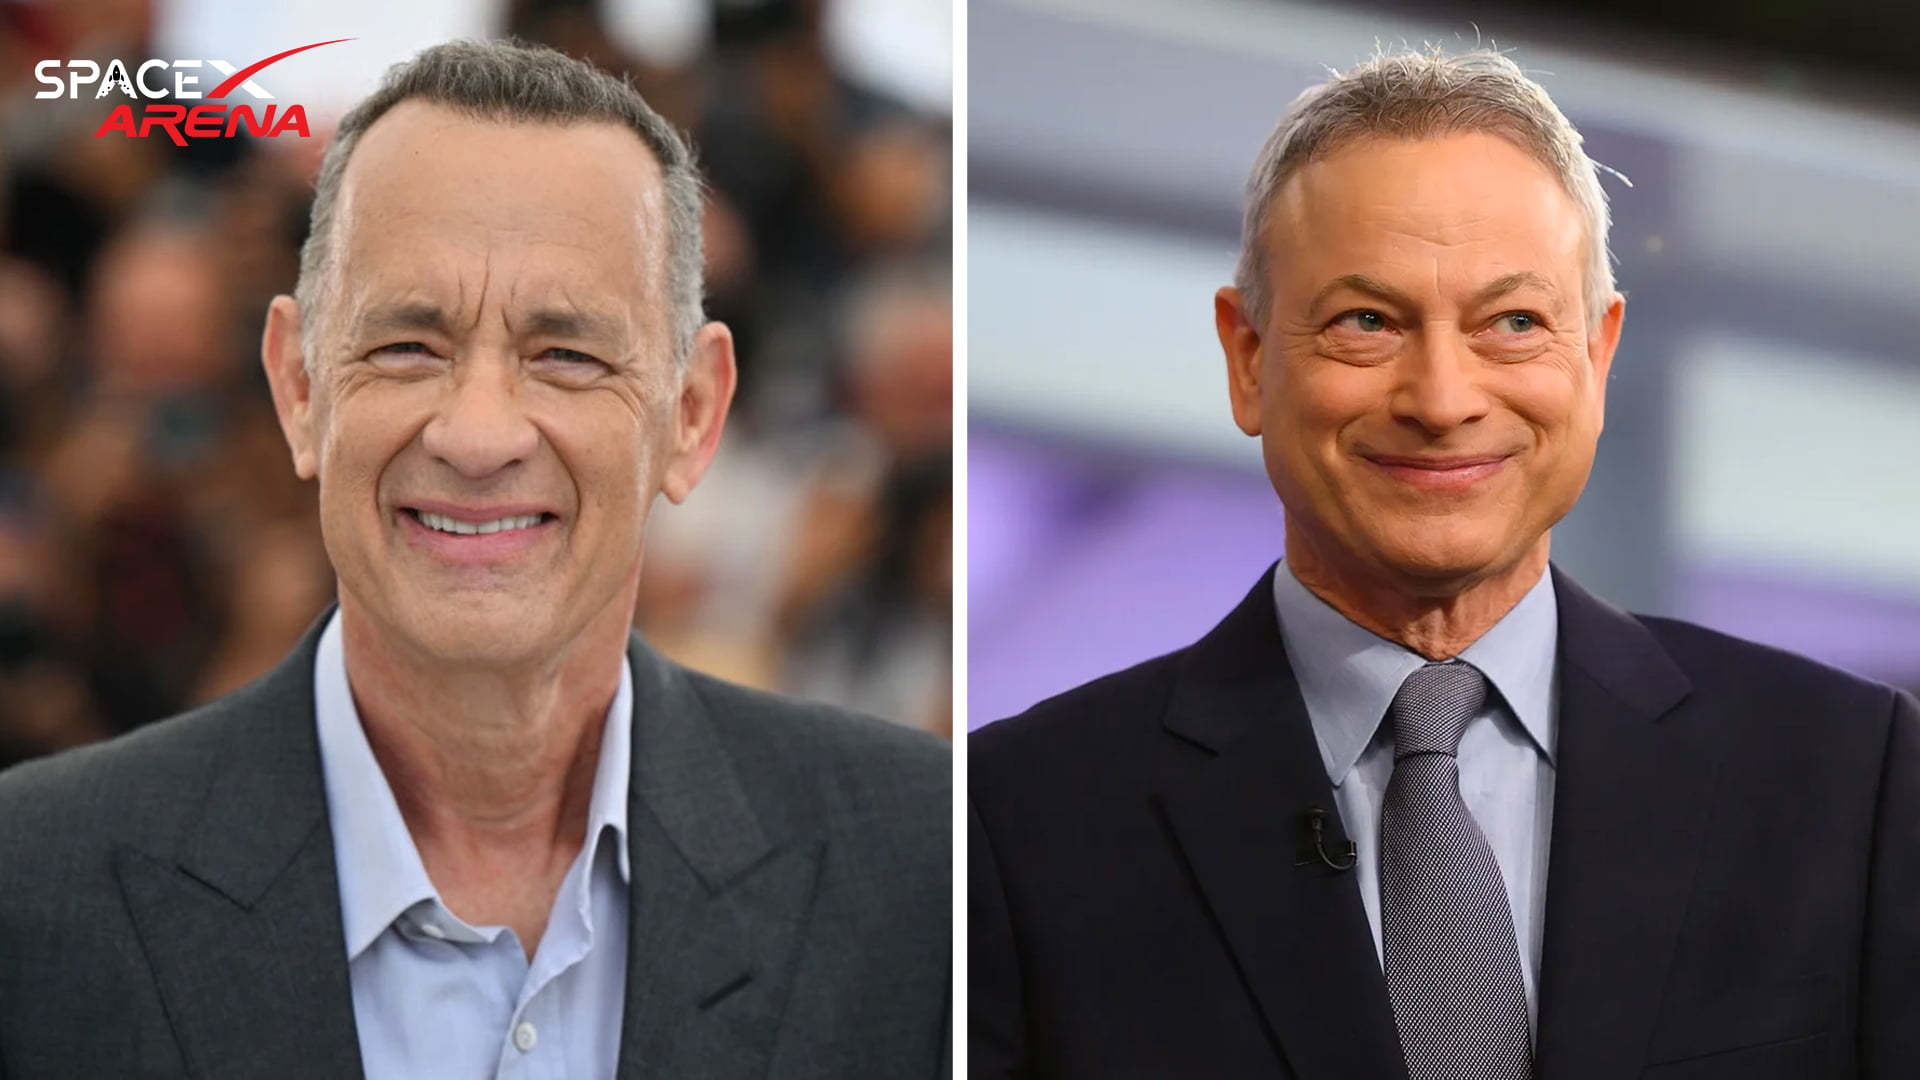 Working with Tom Hanks, according to Gary Sinise, was awful—” He made my skin crawl.”